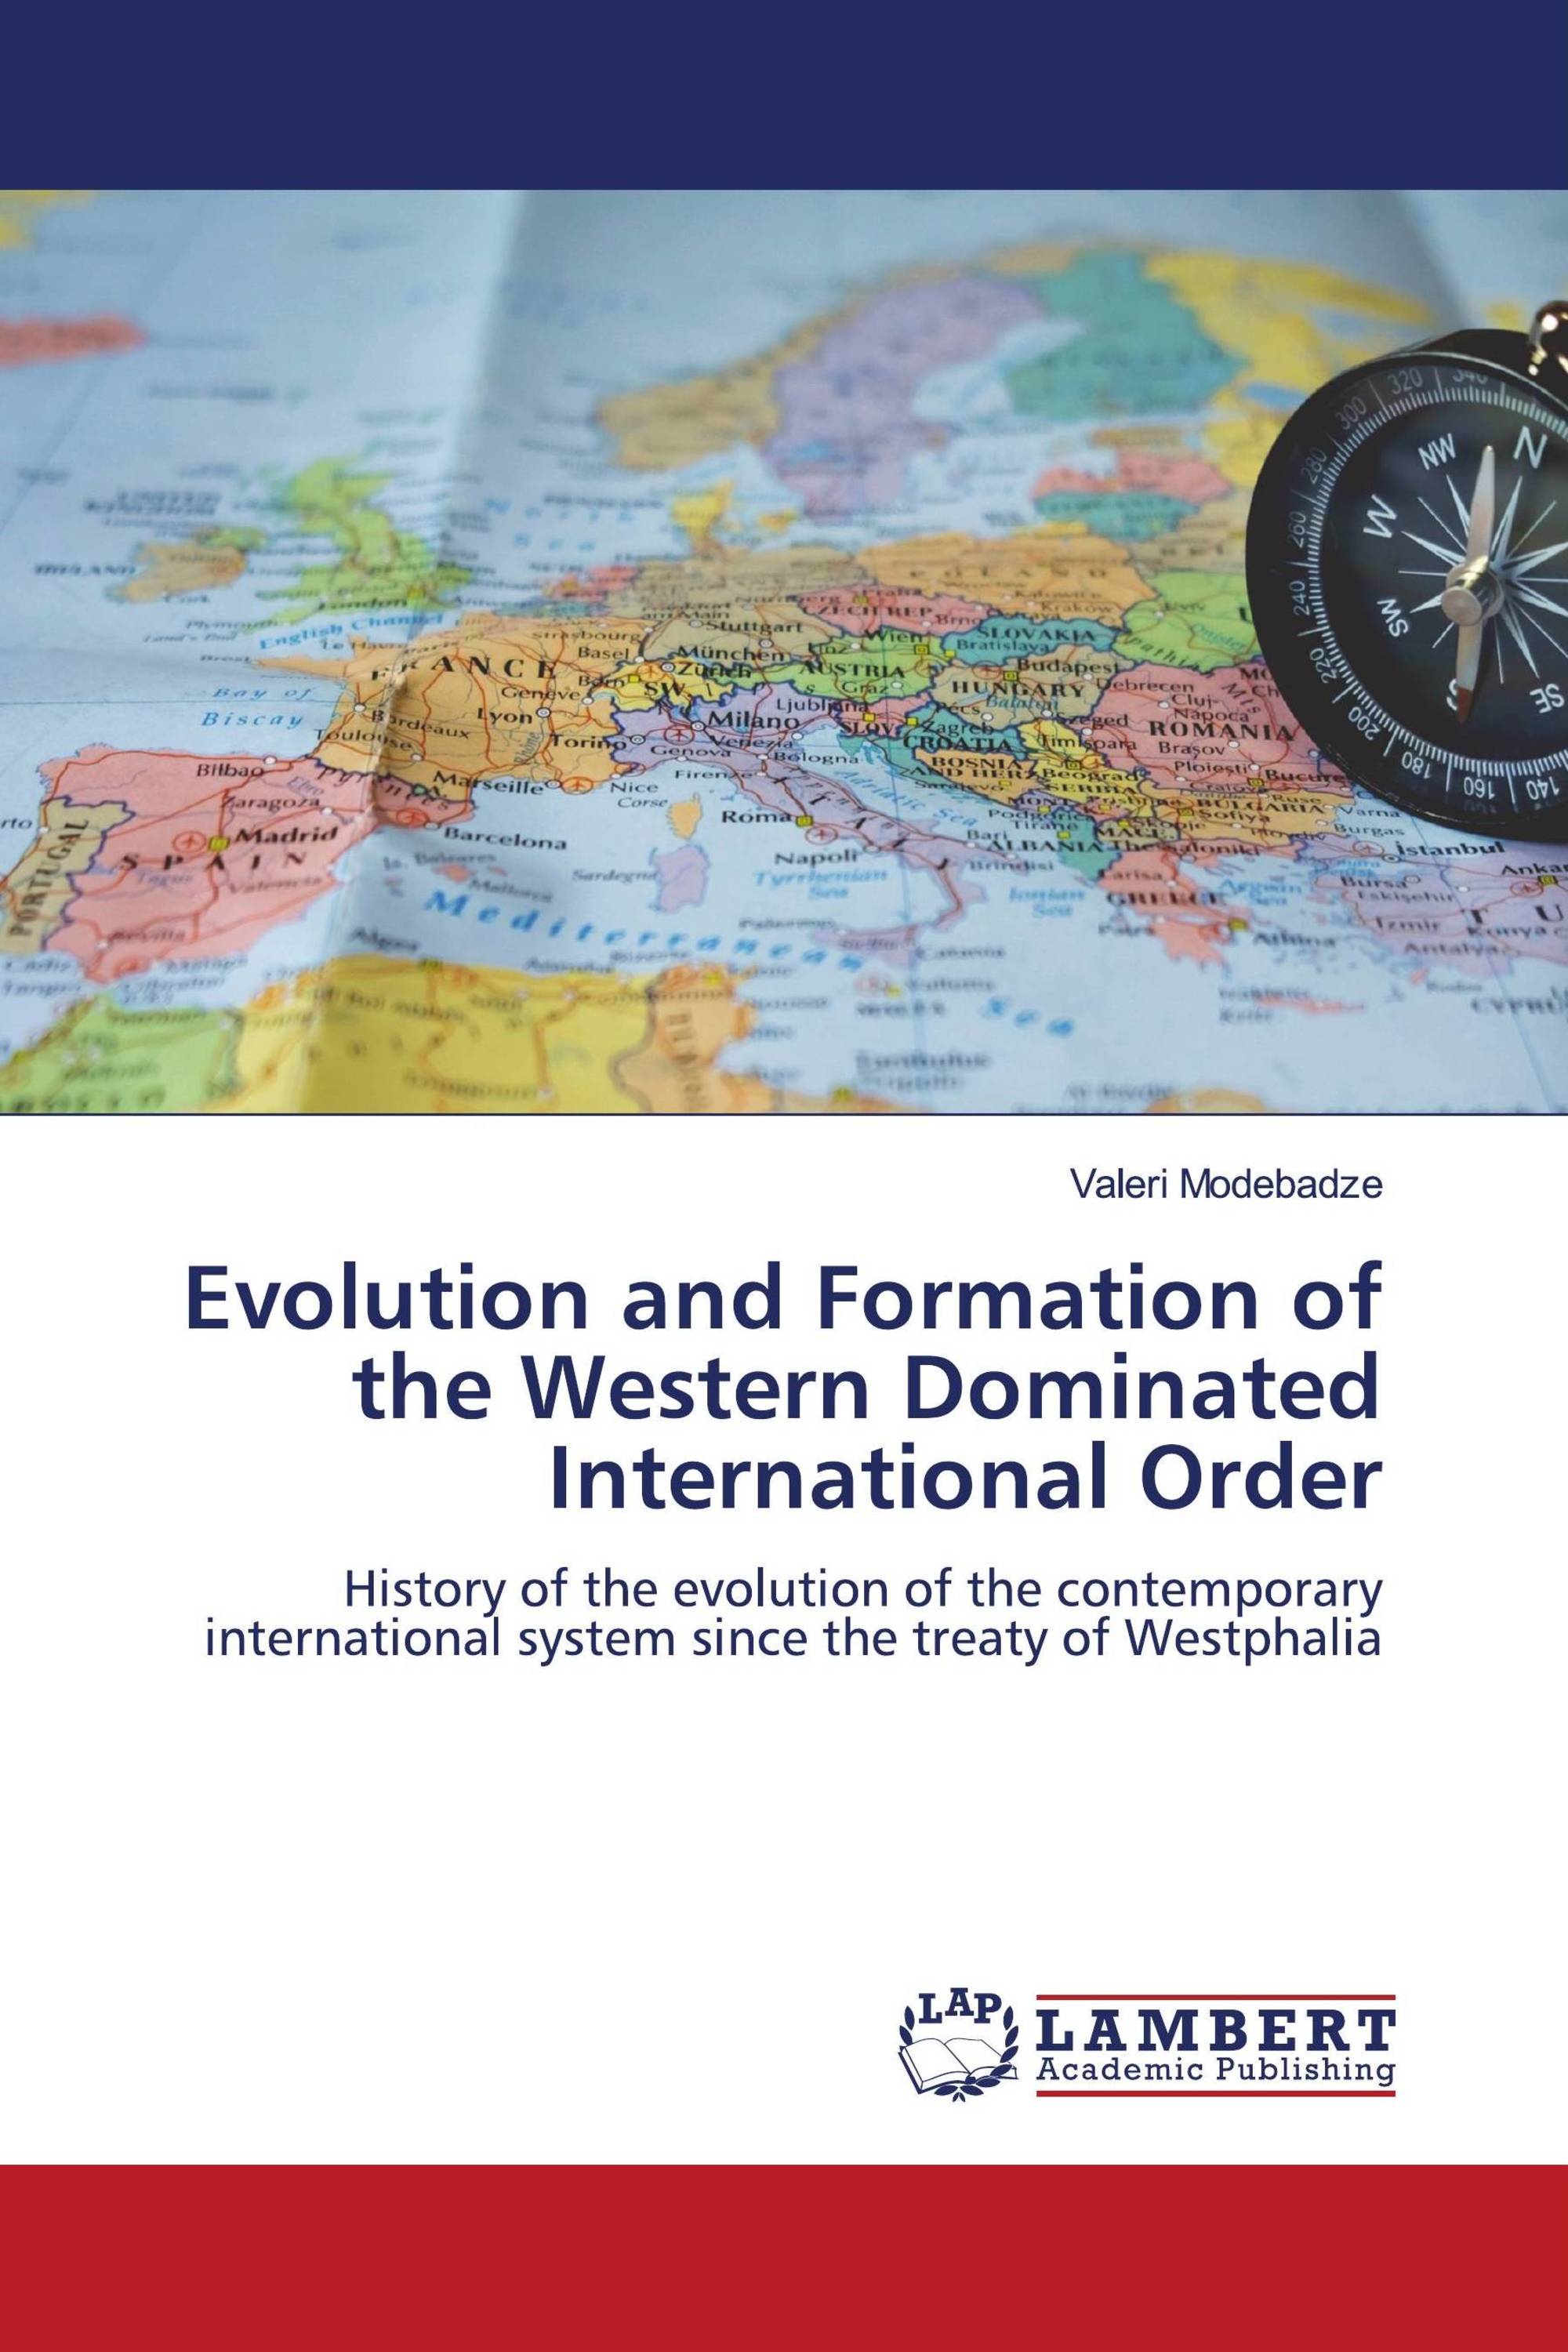 Evolution and Formation of the Western Dominated International Order